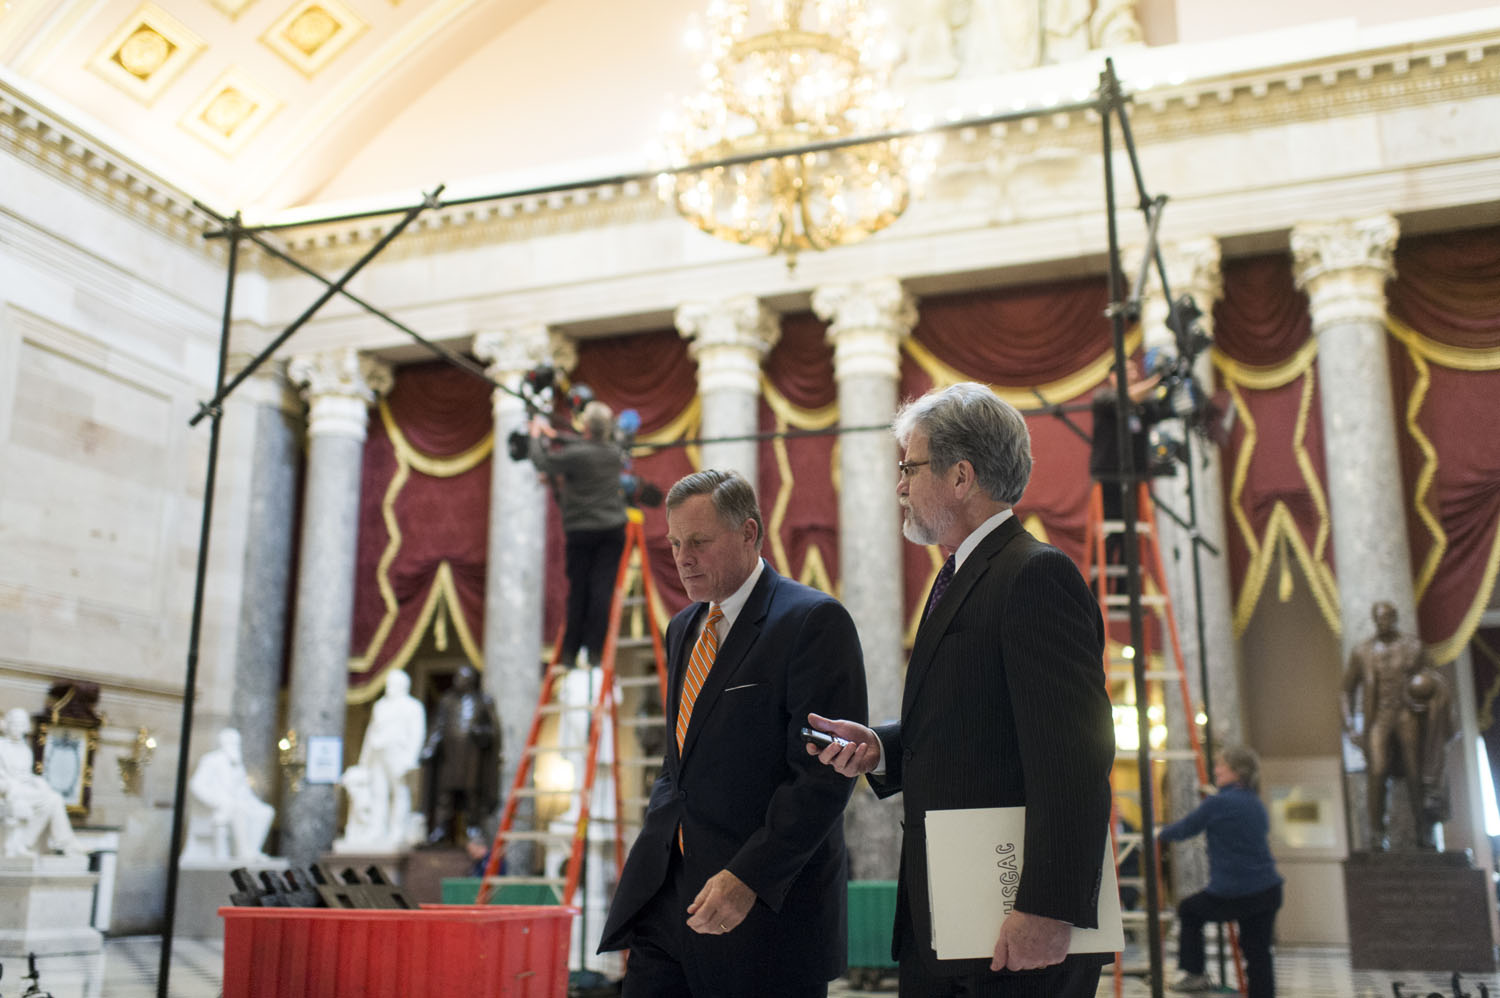 From left: Senator Richard Burr and Senator Tom Coburn walk through Statuary Hall in the Capitol ahead of the State of the Union on Jan. 28, 2014 in Washington, D.C.